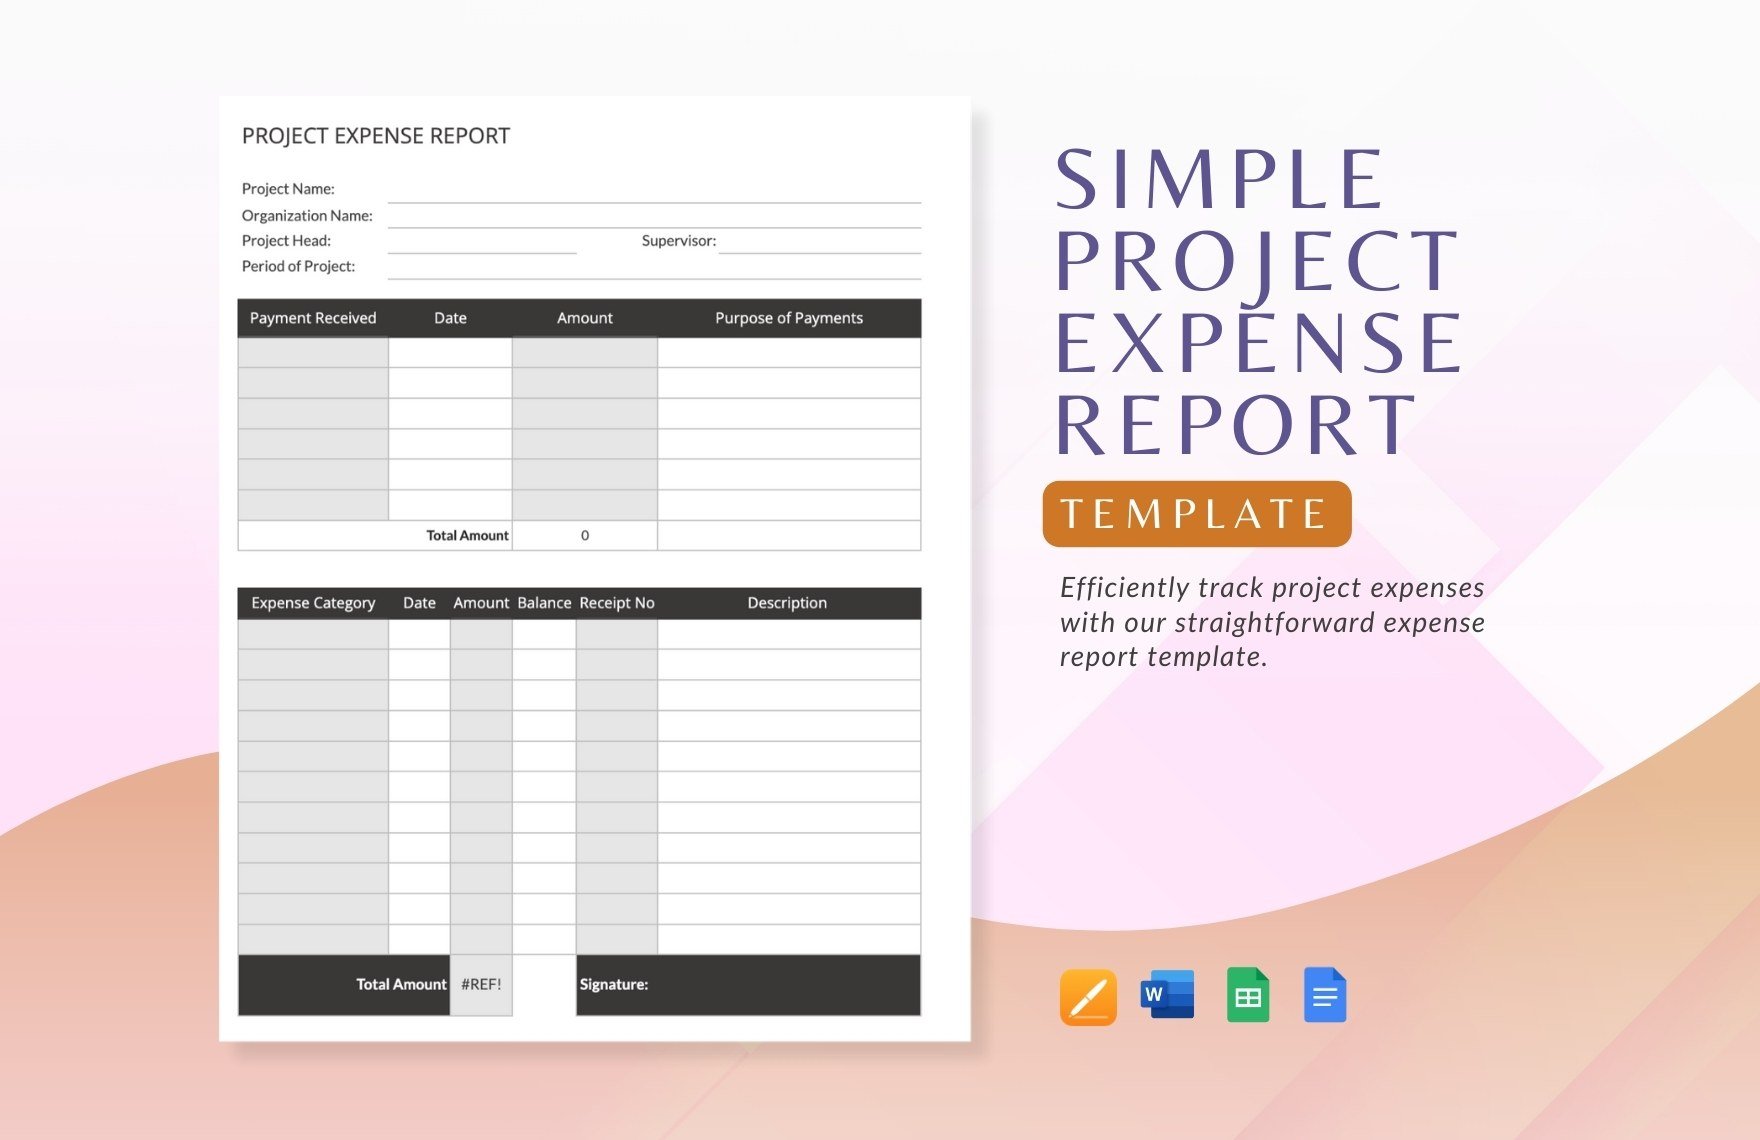 Simple Project Expense Report Template in Word, Google Docs, Google Sheets, Apple Pages